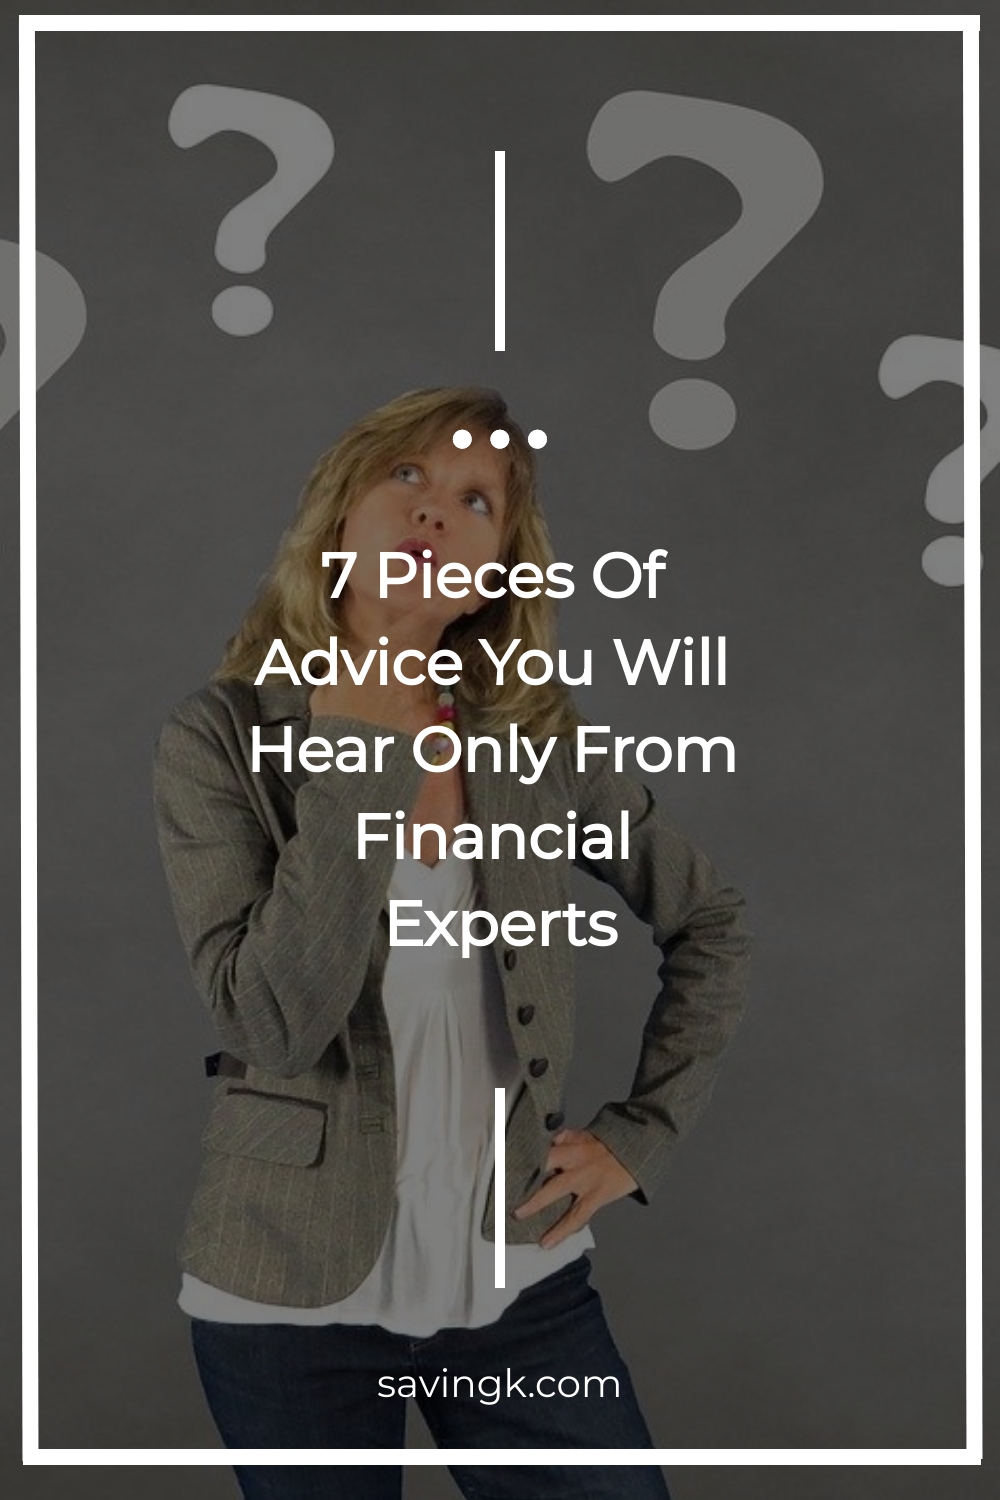 7 Pieces Of Advice You Will Hear Only From Financial Experts